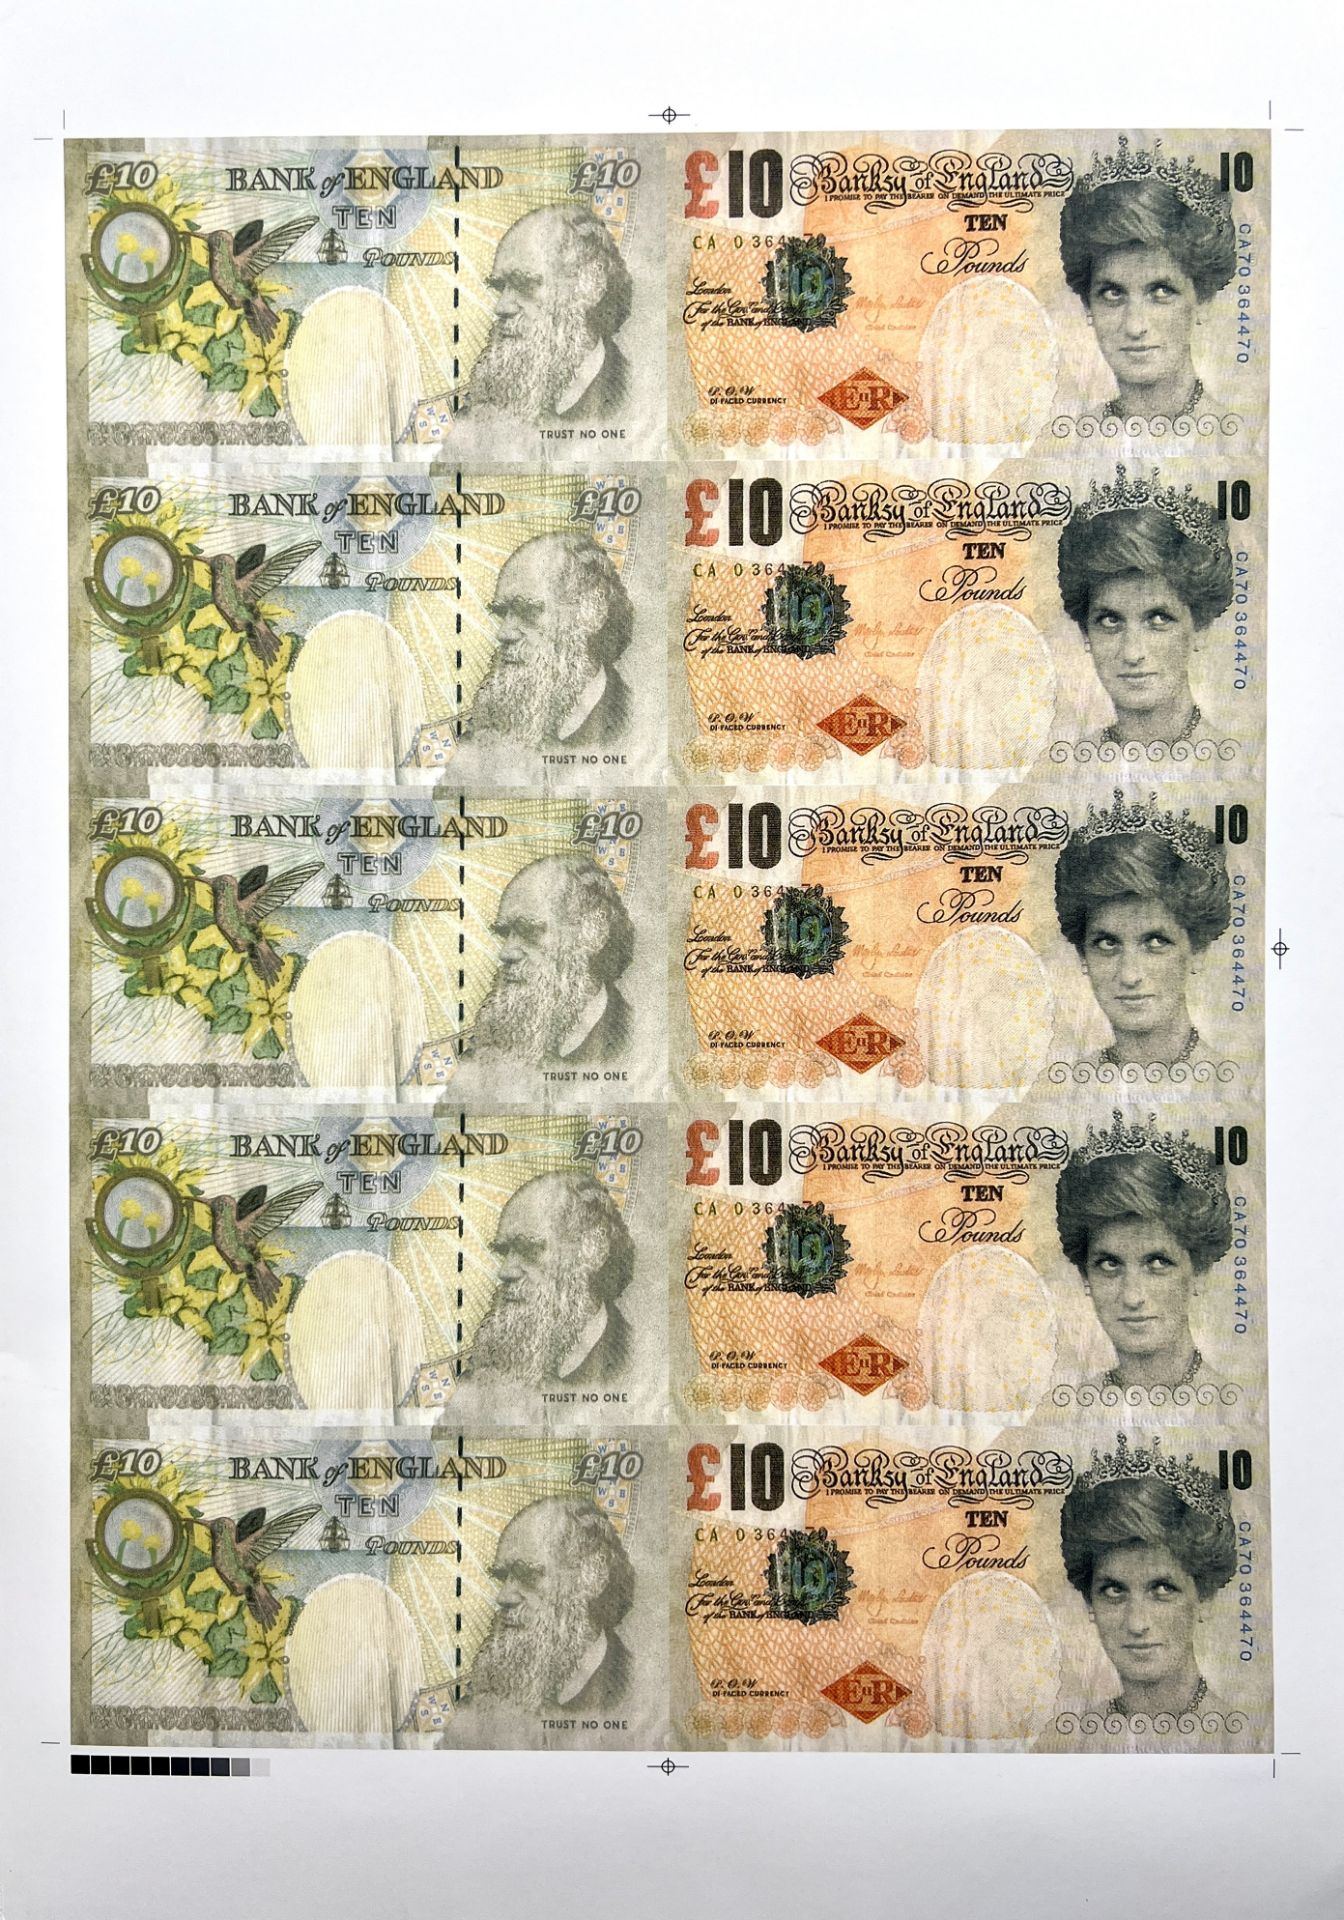 Banksy. Double-sided color printing test sheet on paper showing a 10-pound banknote with the effigy